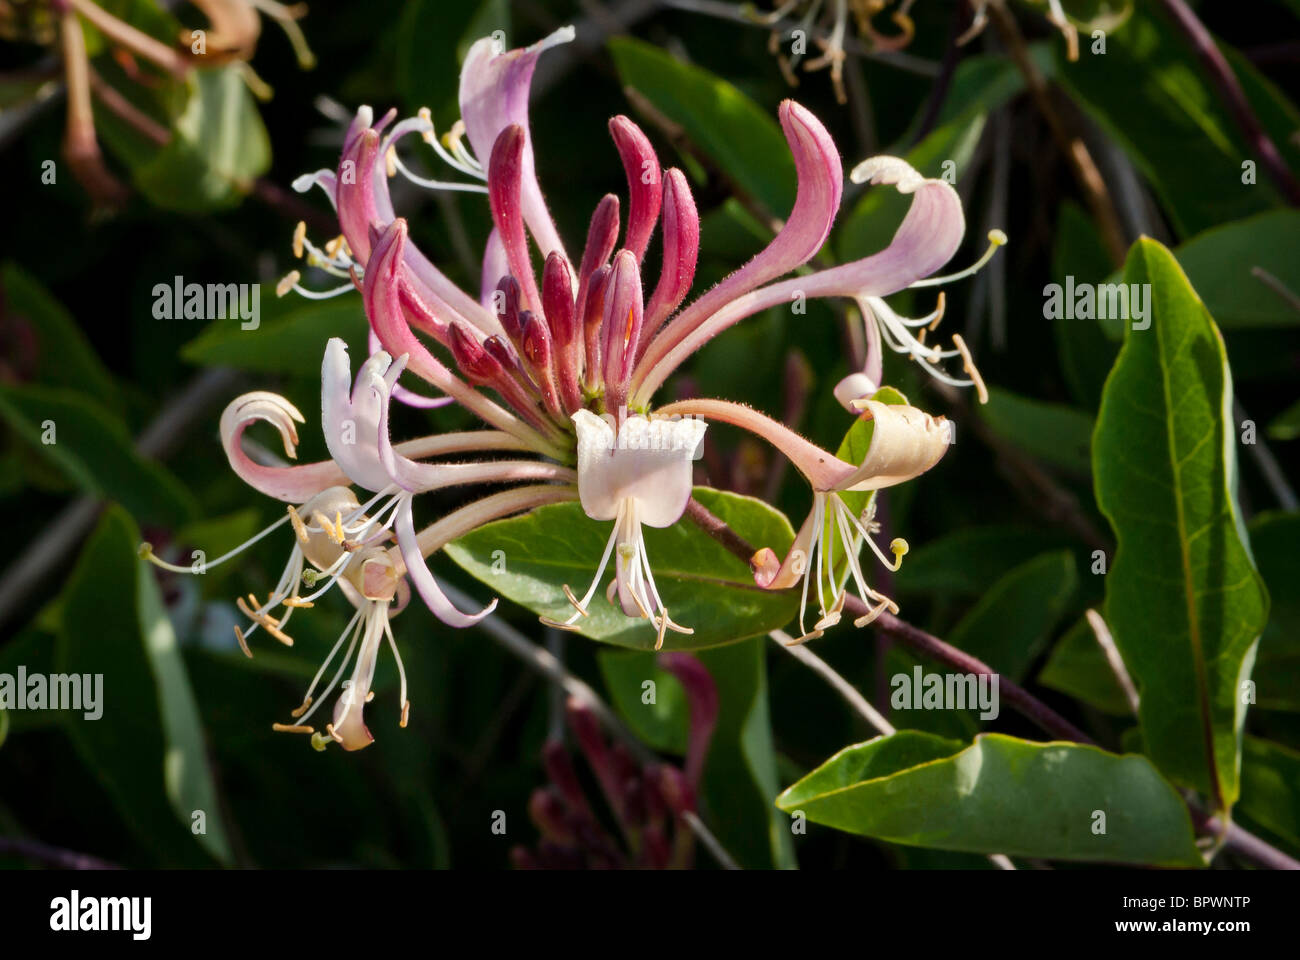 Honeysuckle flower. Also known as Lonicera periclymenum. Stock Photo